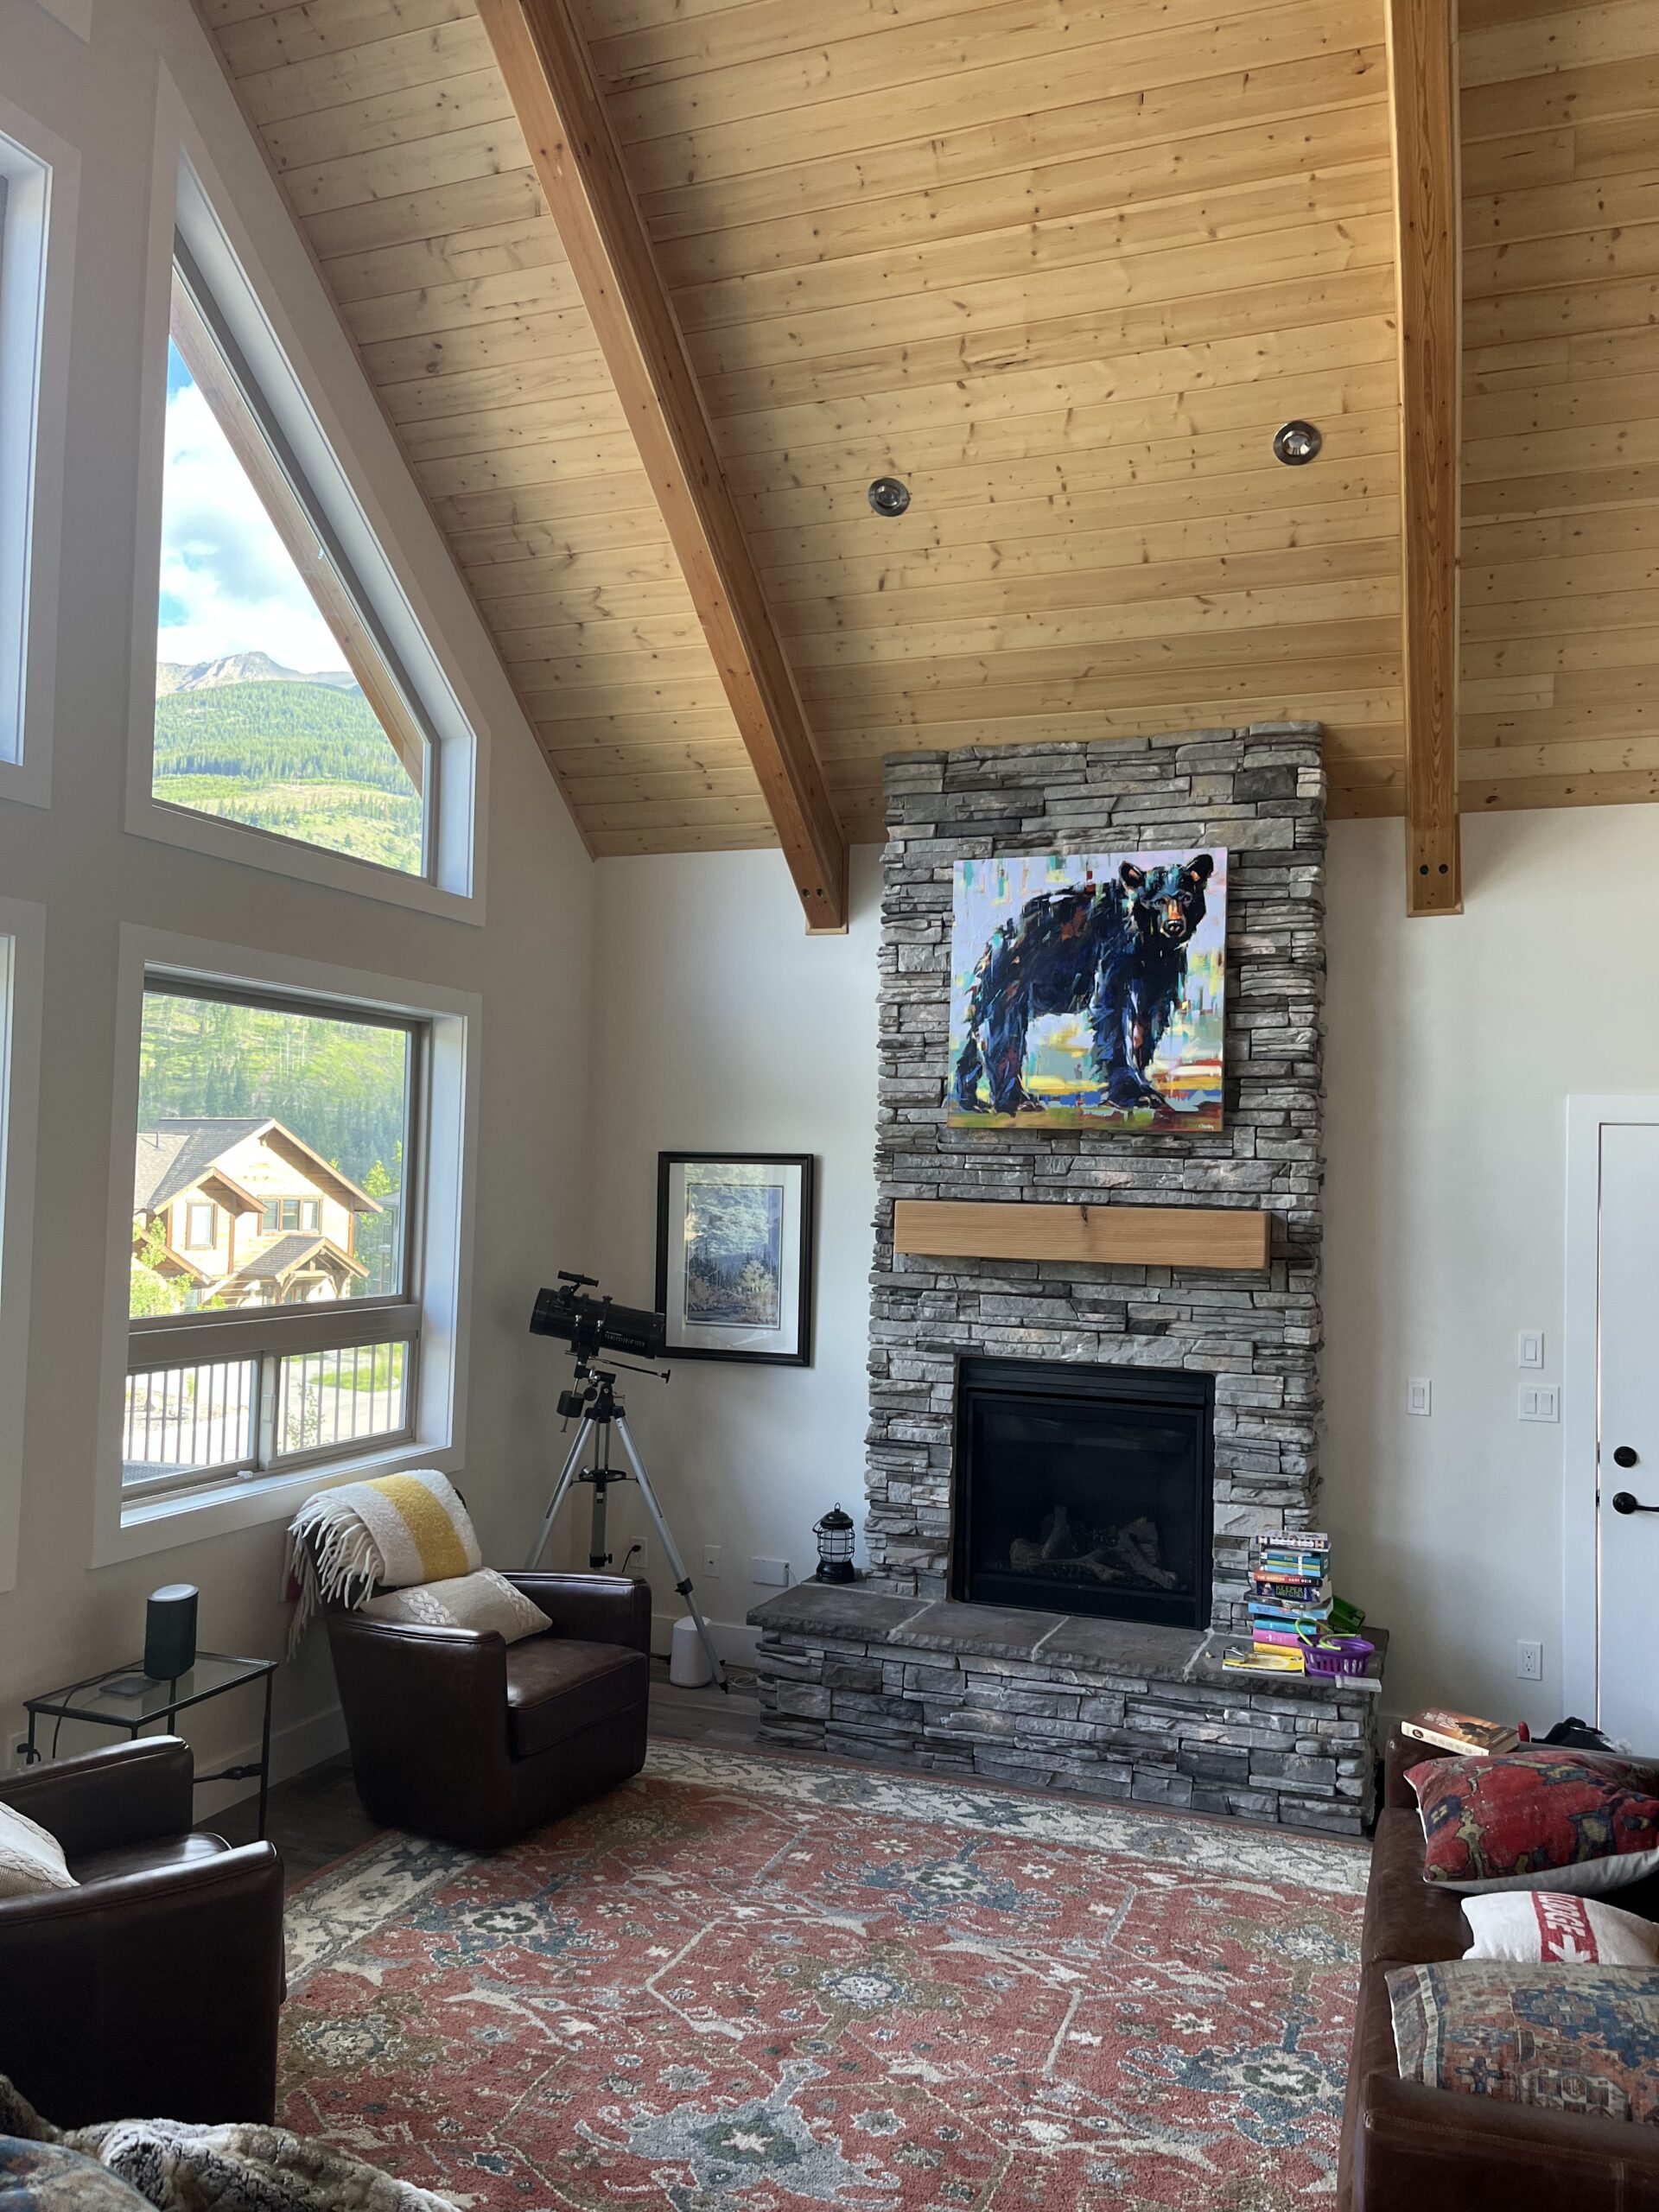 Cute black bear cub painting by Verne Busby installed above a rock fireplace in a cozy mountain home.